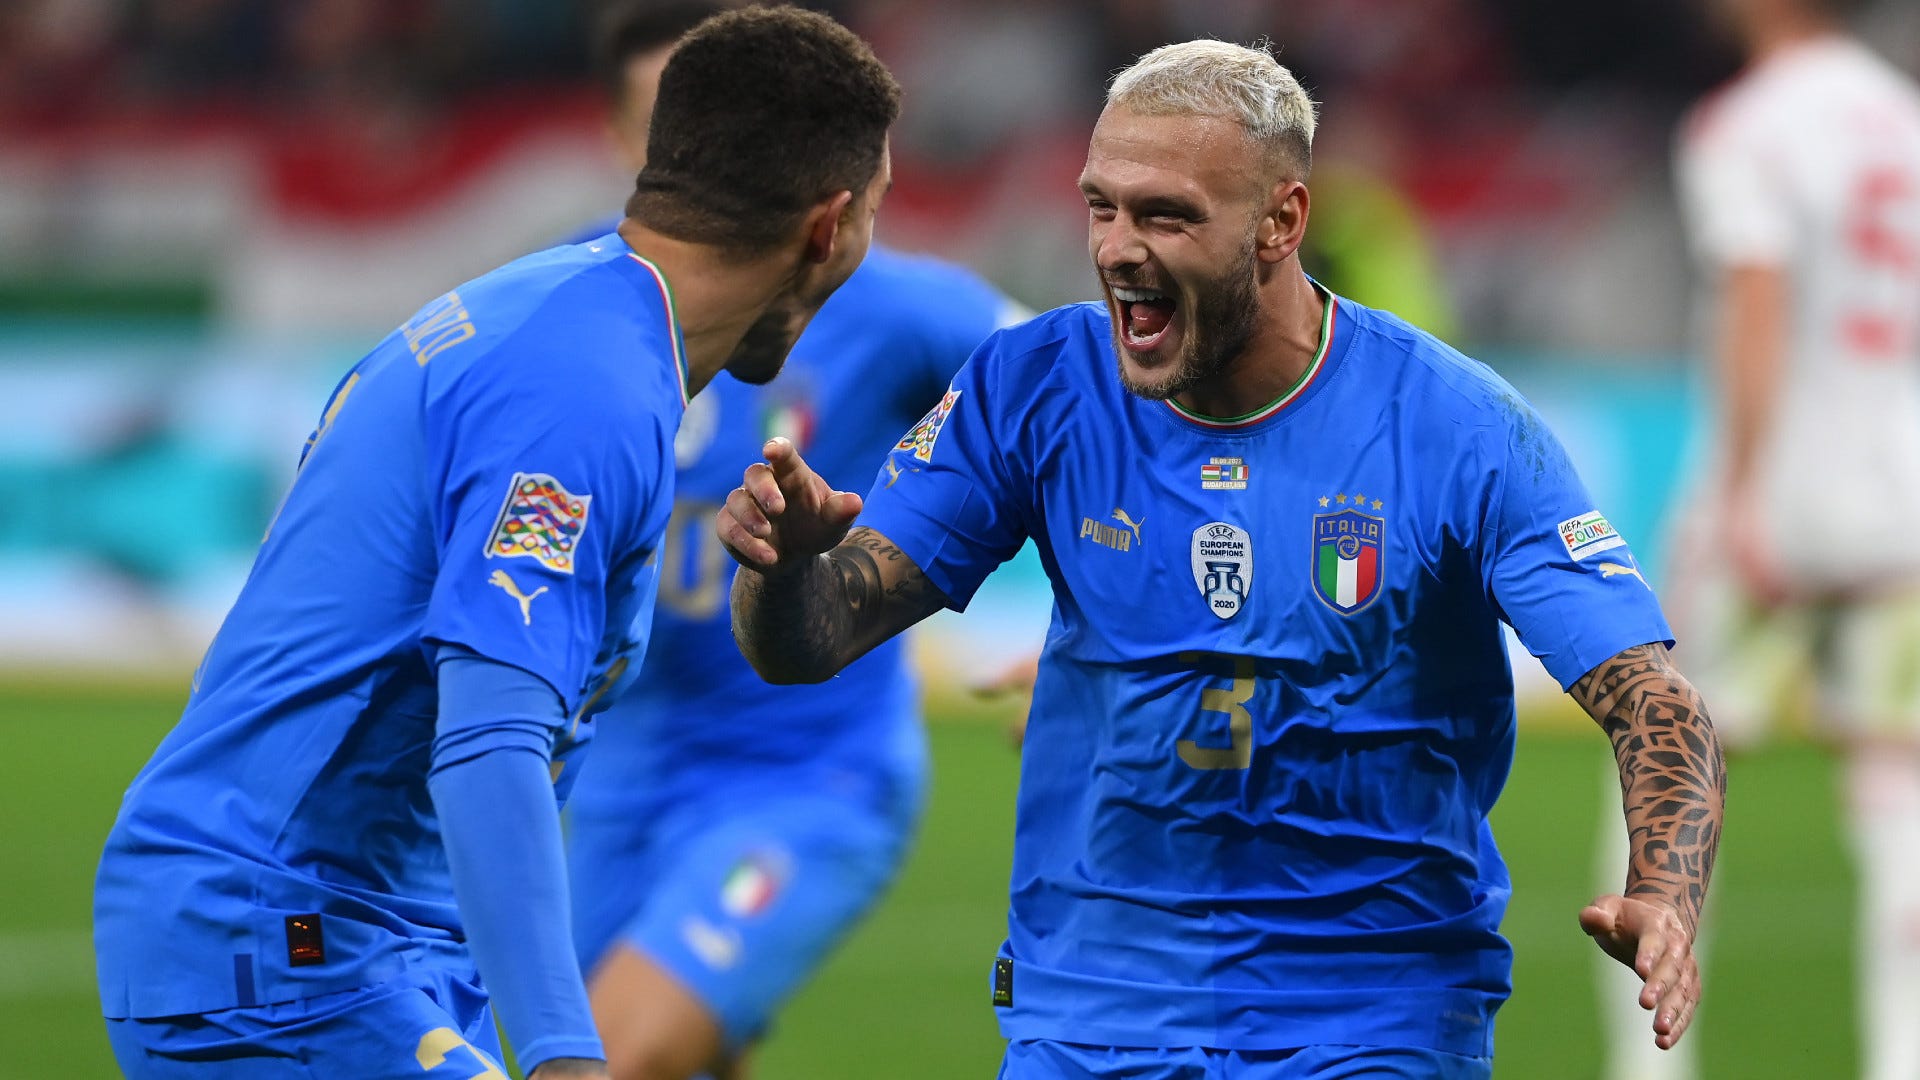 Spain vs Italy Live stream, TV channel, kick-off time and where to watch UEFA Nations League semi-final Goal US